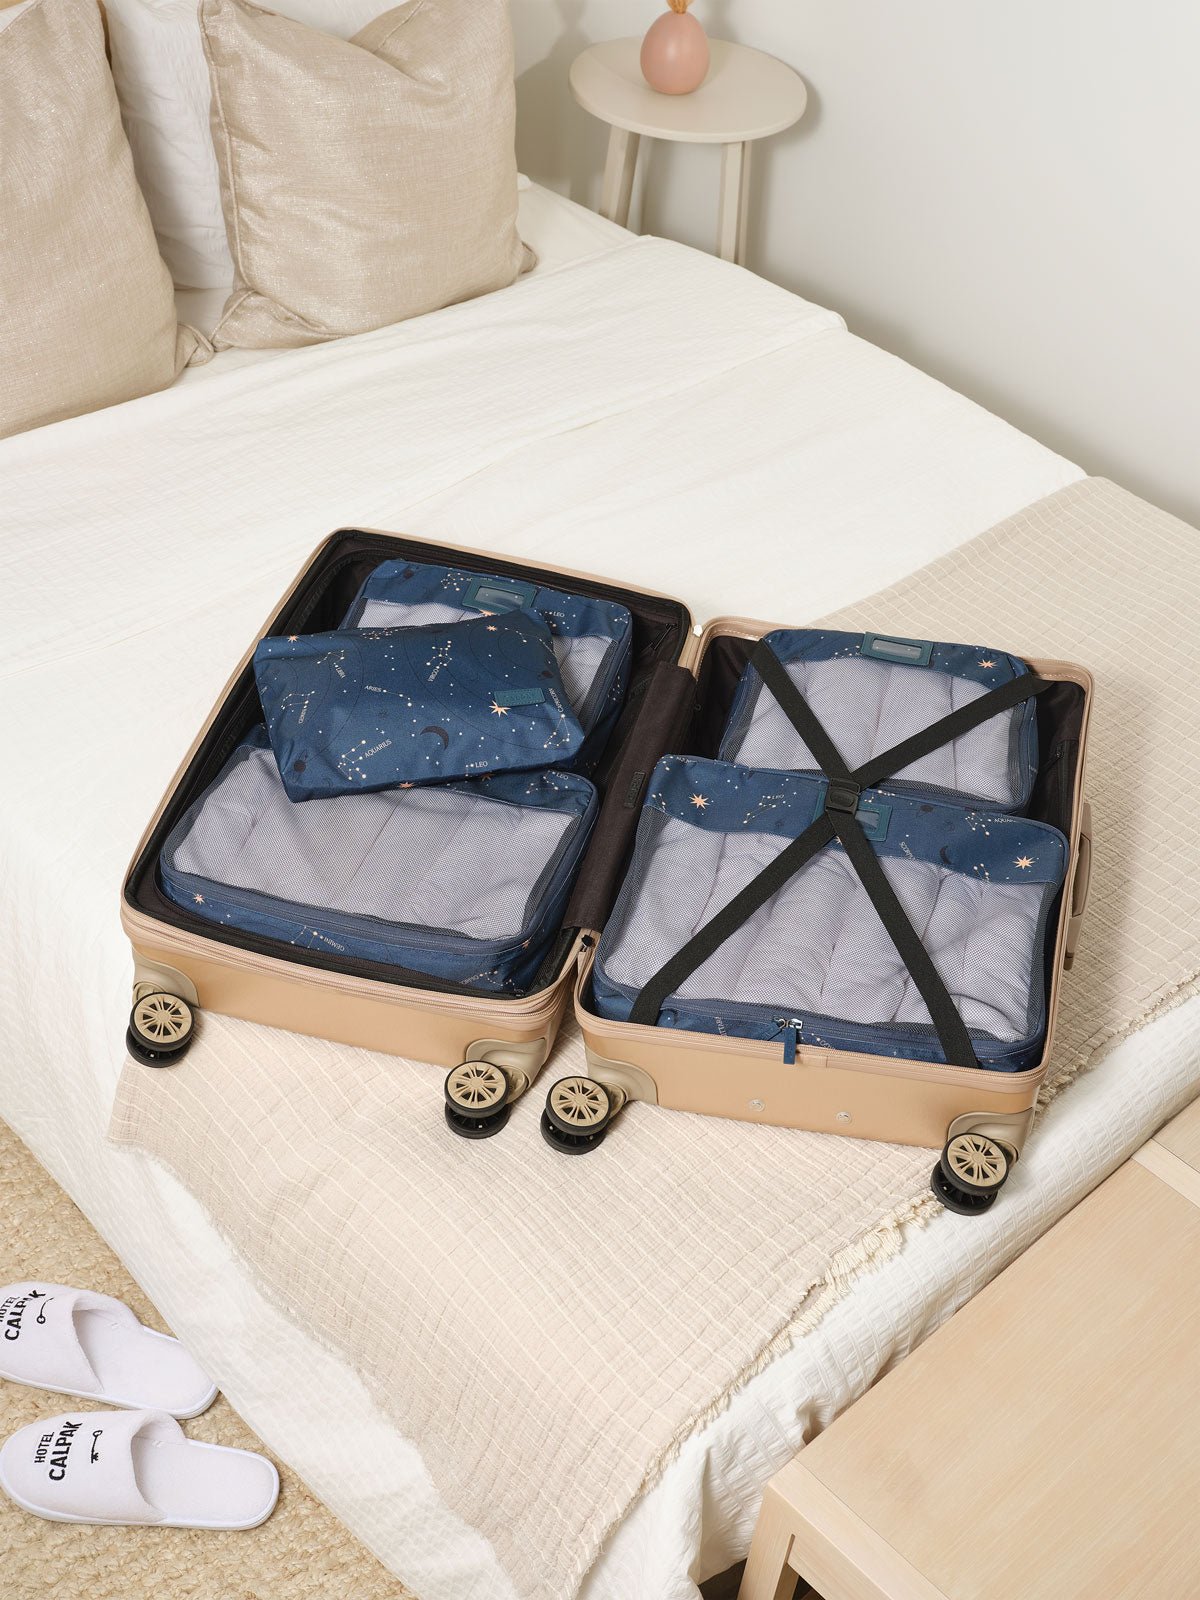 CALPAK suitcase packing cubes in astrology